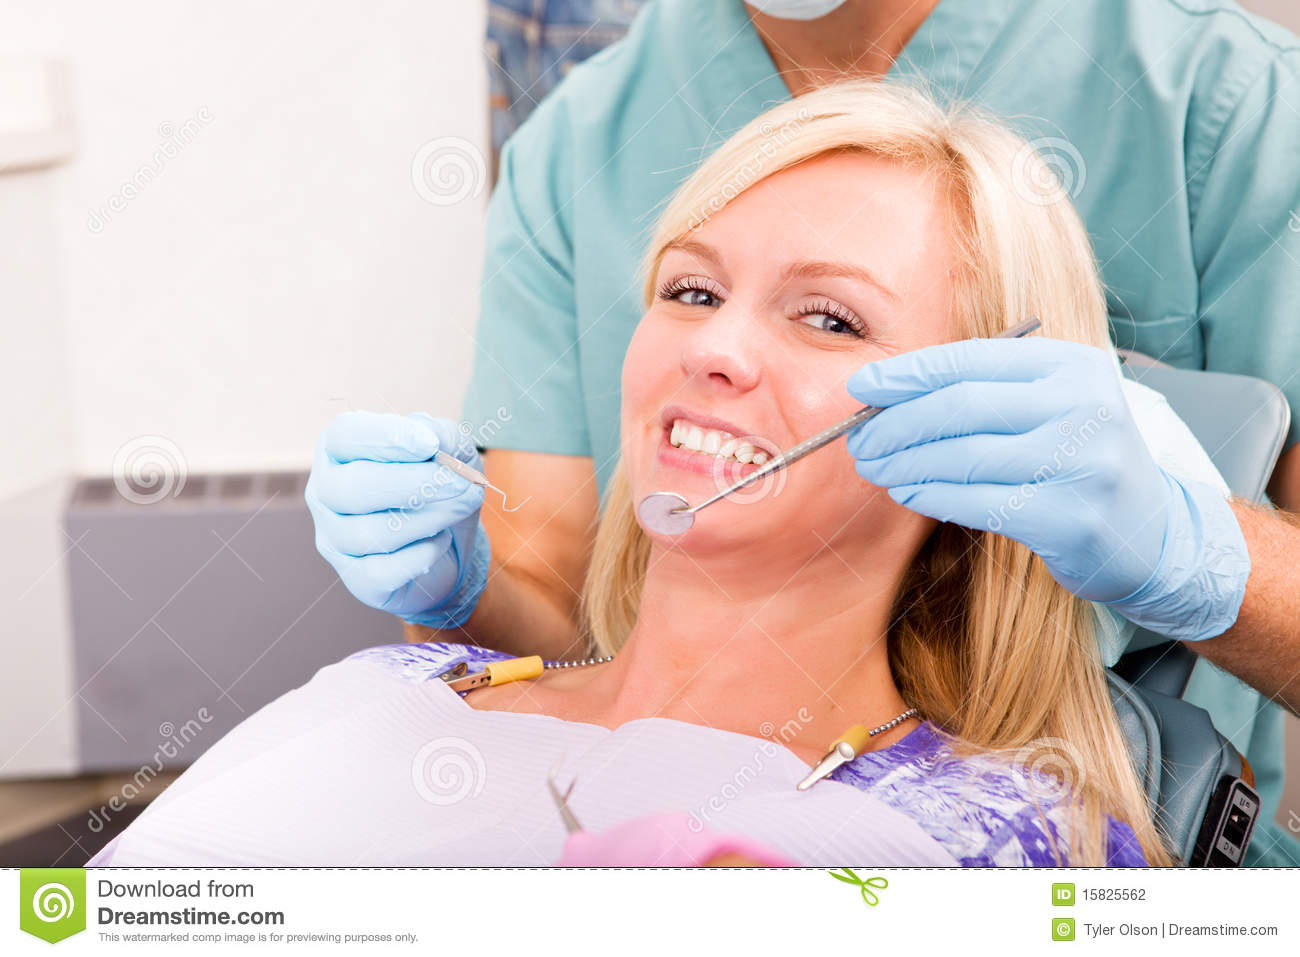 Smiling Woman At The Dentist Ready For A Check Up